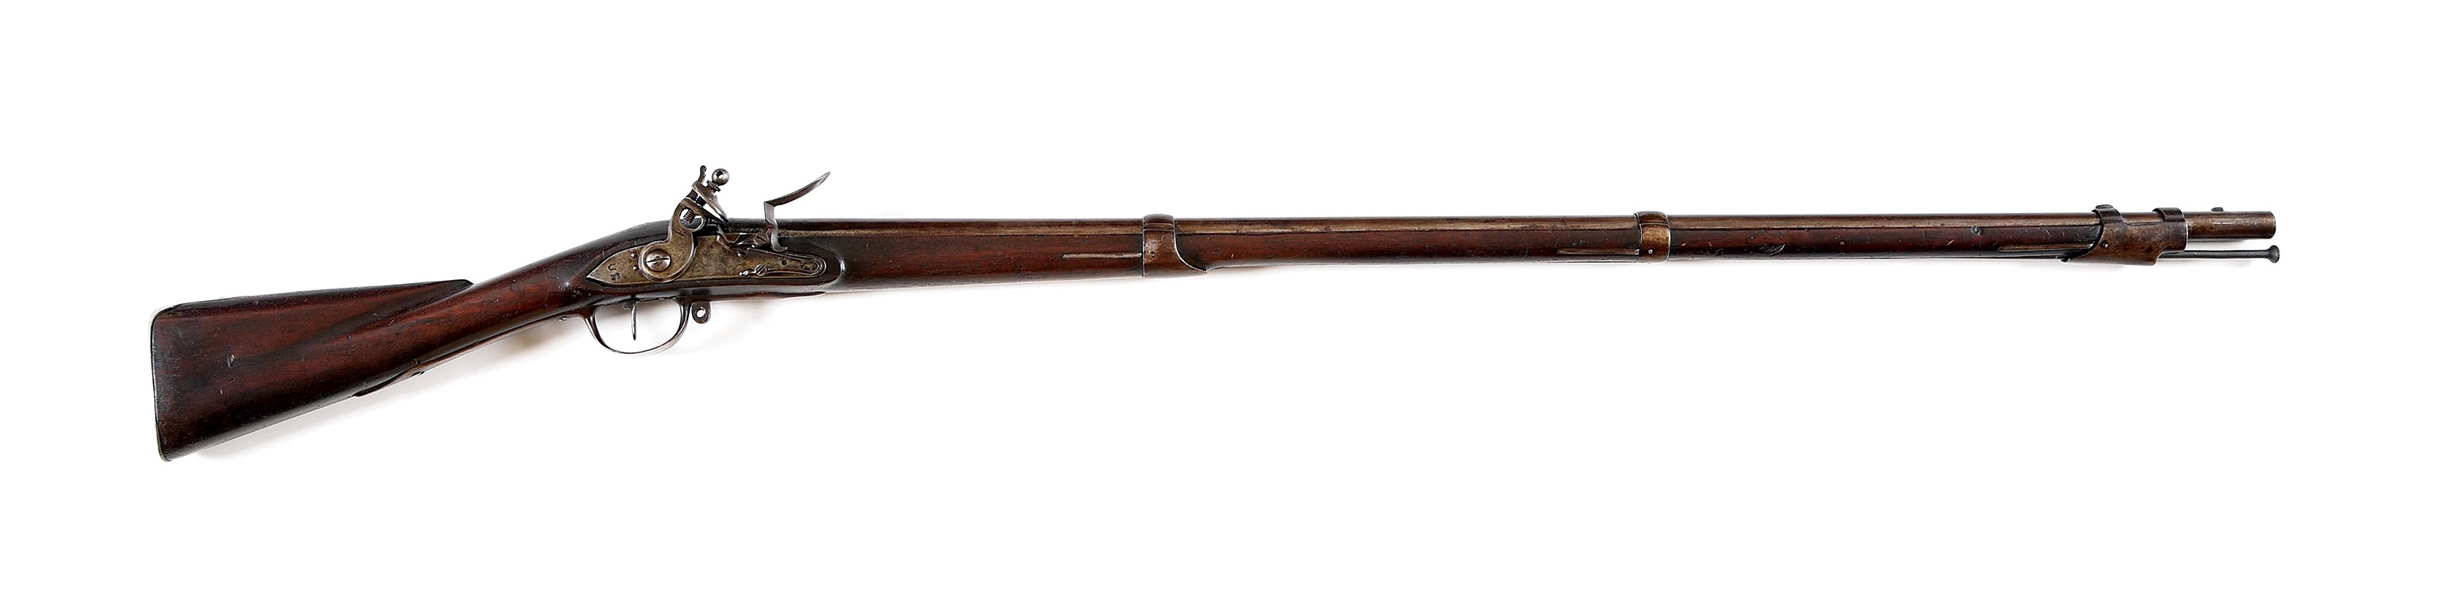 (A) EXTREMELY RARE US MODEL 1794 FLINTLOCK MUSKET WITH IMPORTANT 1798 SCHROYER ENDORSEMENT.